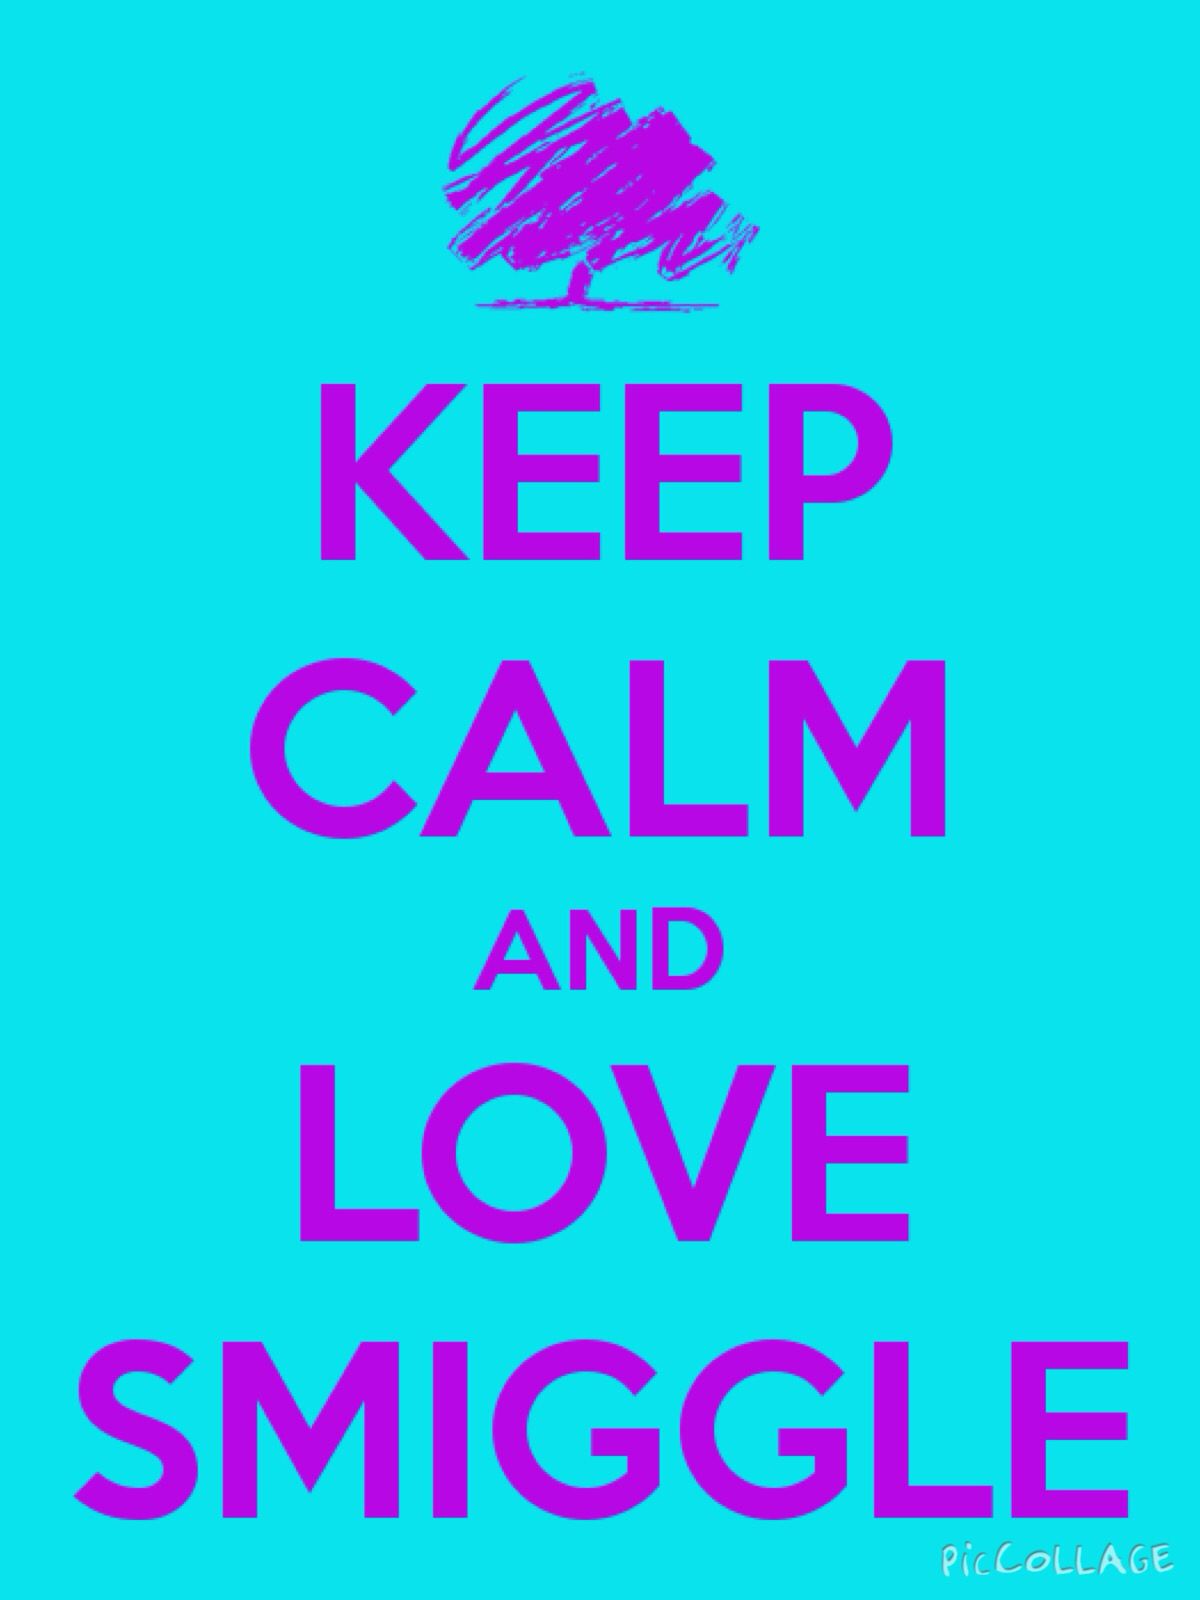 Smiggle - Keep Calm And Carry , HD Wallpaper & Backgrounds